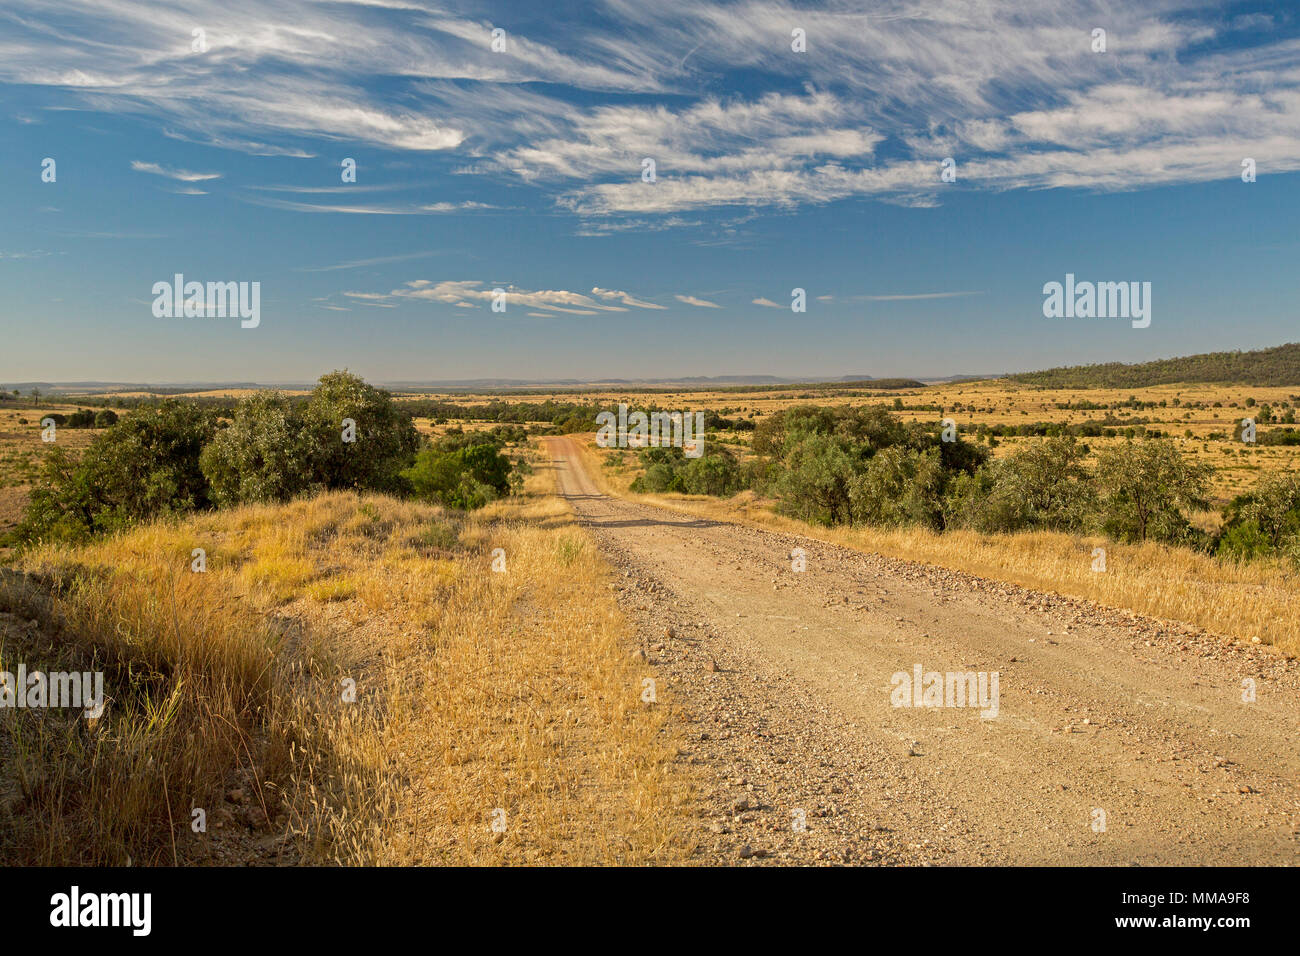 Long straight gravel road slicing through Australian outback landscape with scattered shrubs and stretching to distant horizon under blue sky Stock Photo